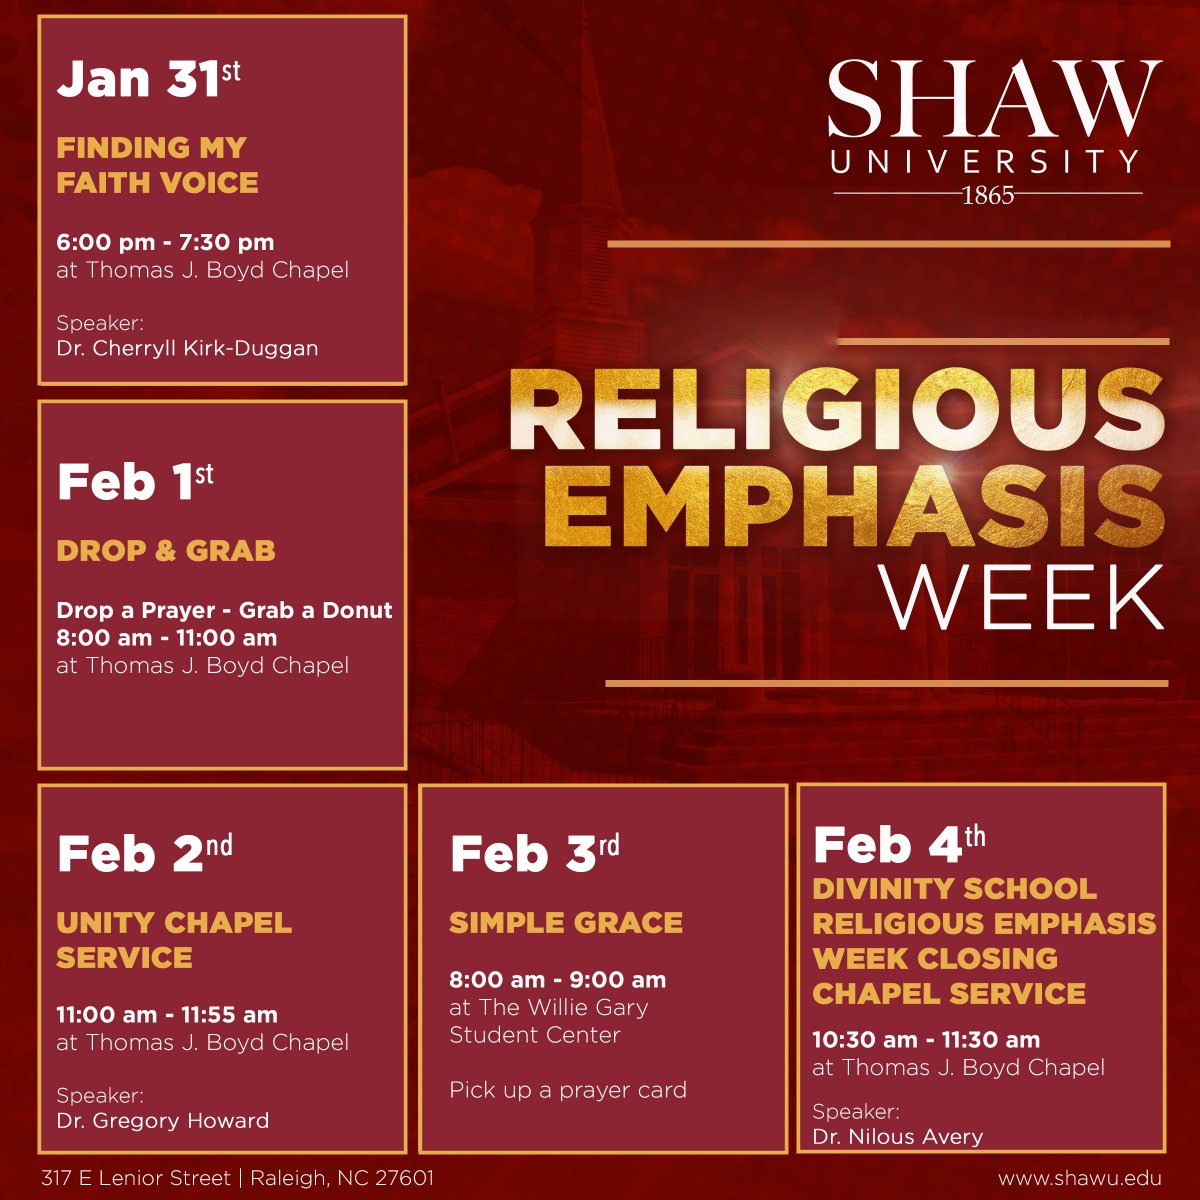 #ShawUBears, Religious Emphasis Week kicks off TONIGHT with 'Finding my Faith Voice.' Be sure to come out and attend all the events we have planned this week!